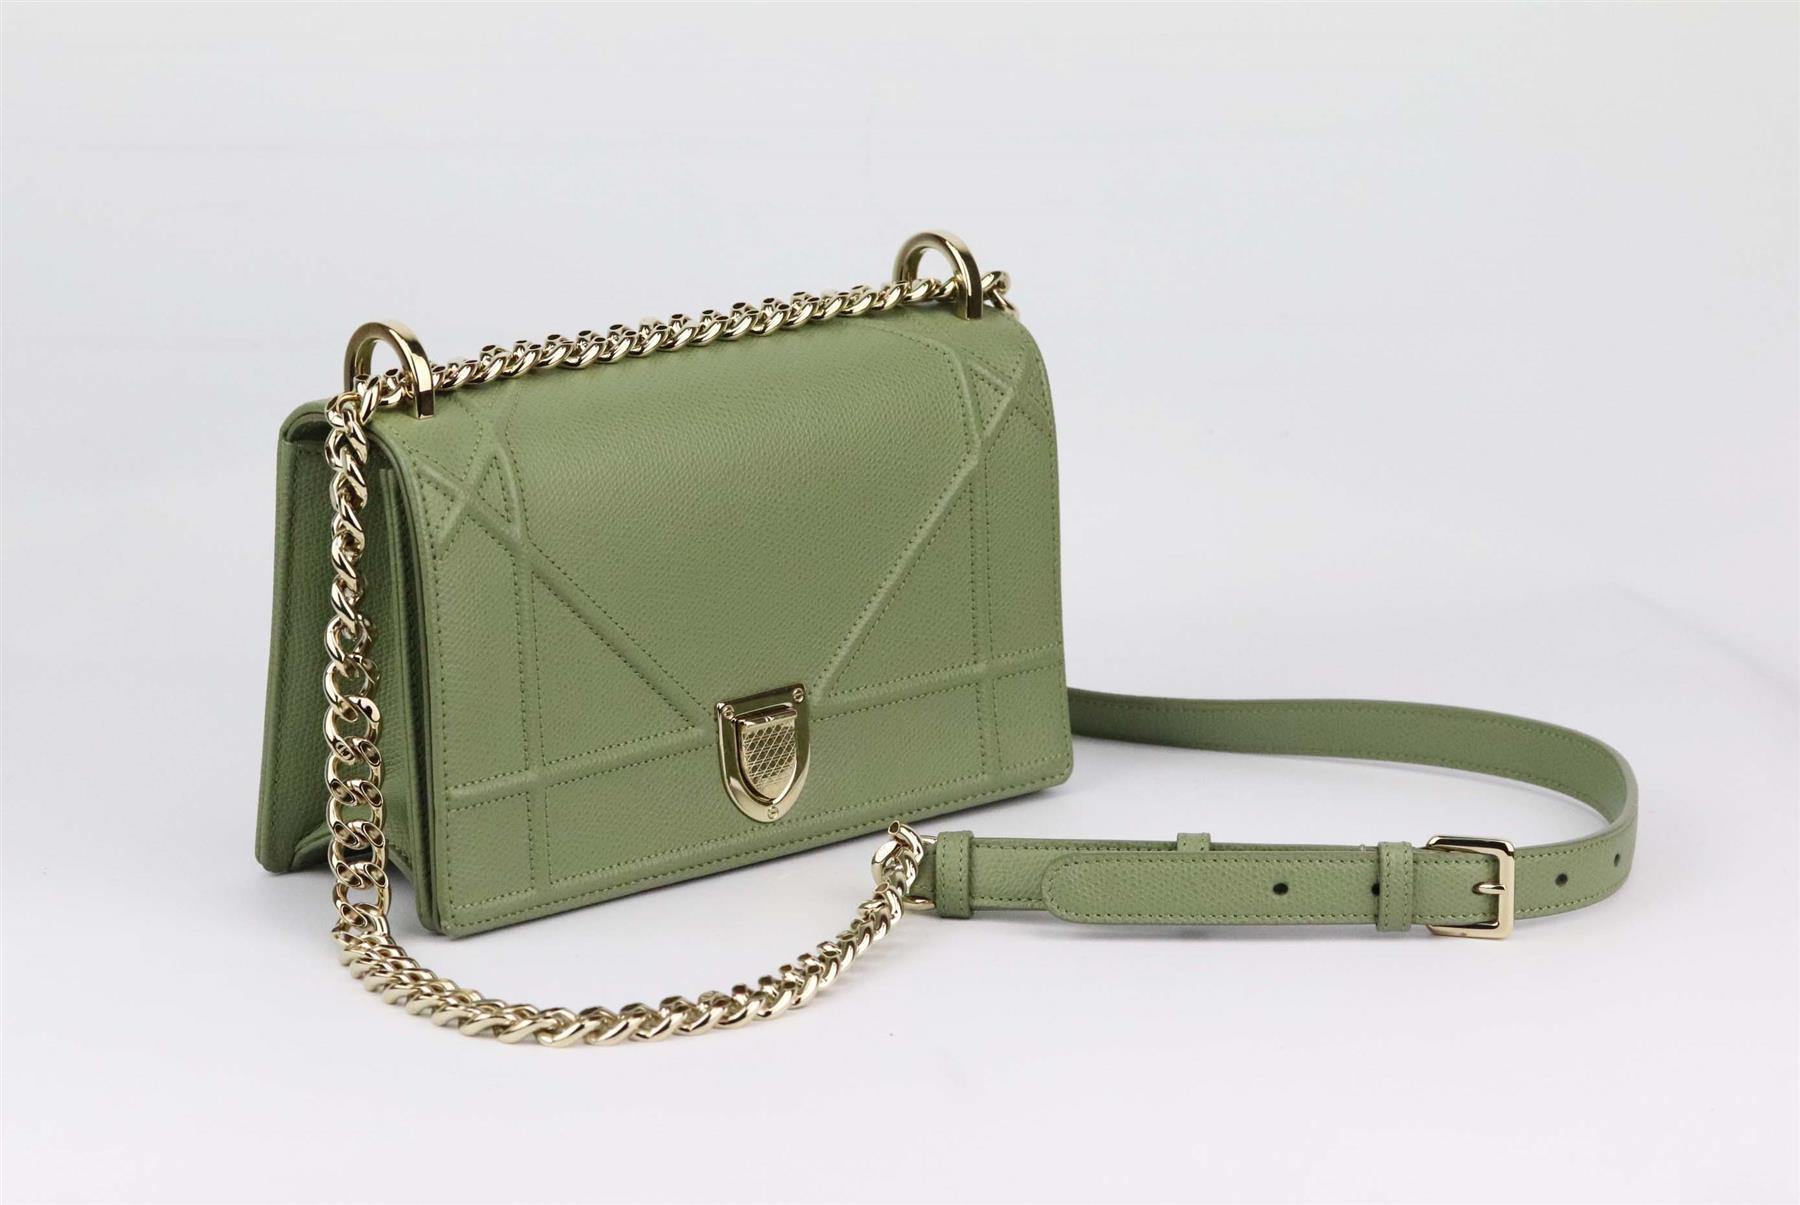 Christian Dior reinterprets its iconic Cannage design as a khaki Diorama flap bag – one of the favourite silhouettes, in the signature leather technique, the khaki calfskin leather has a structured shape and secured with a fold-over magnetic